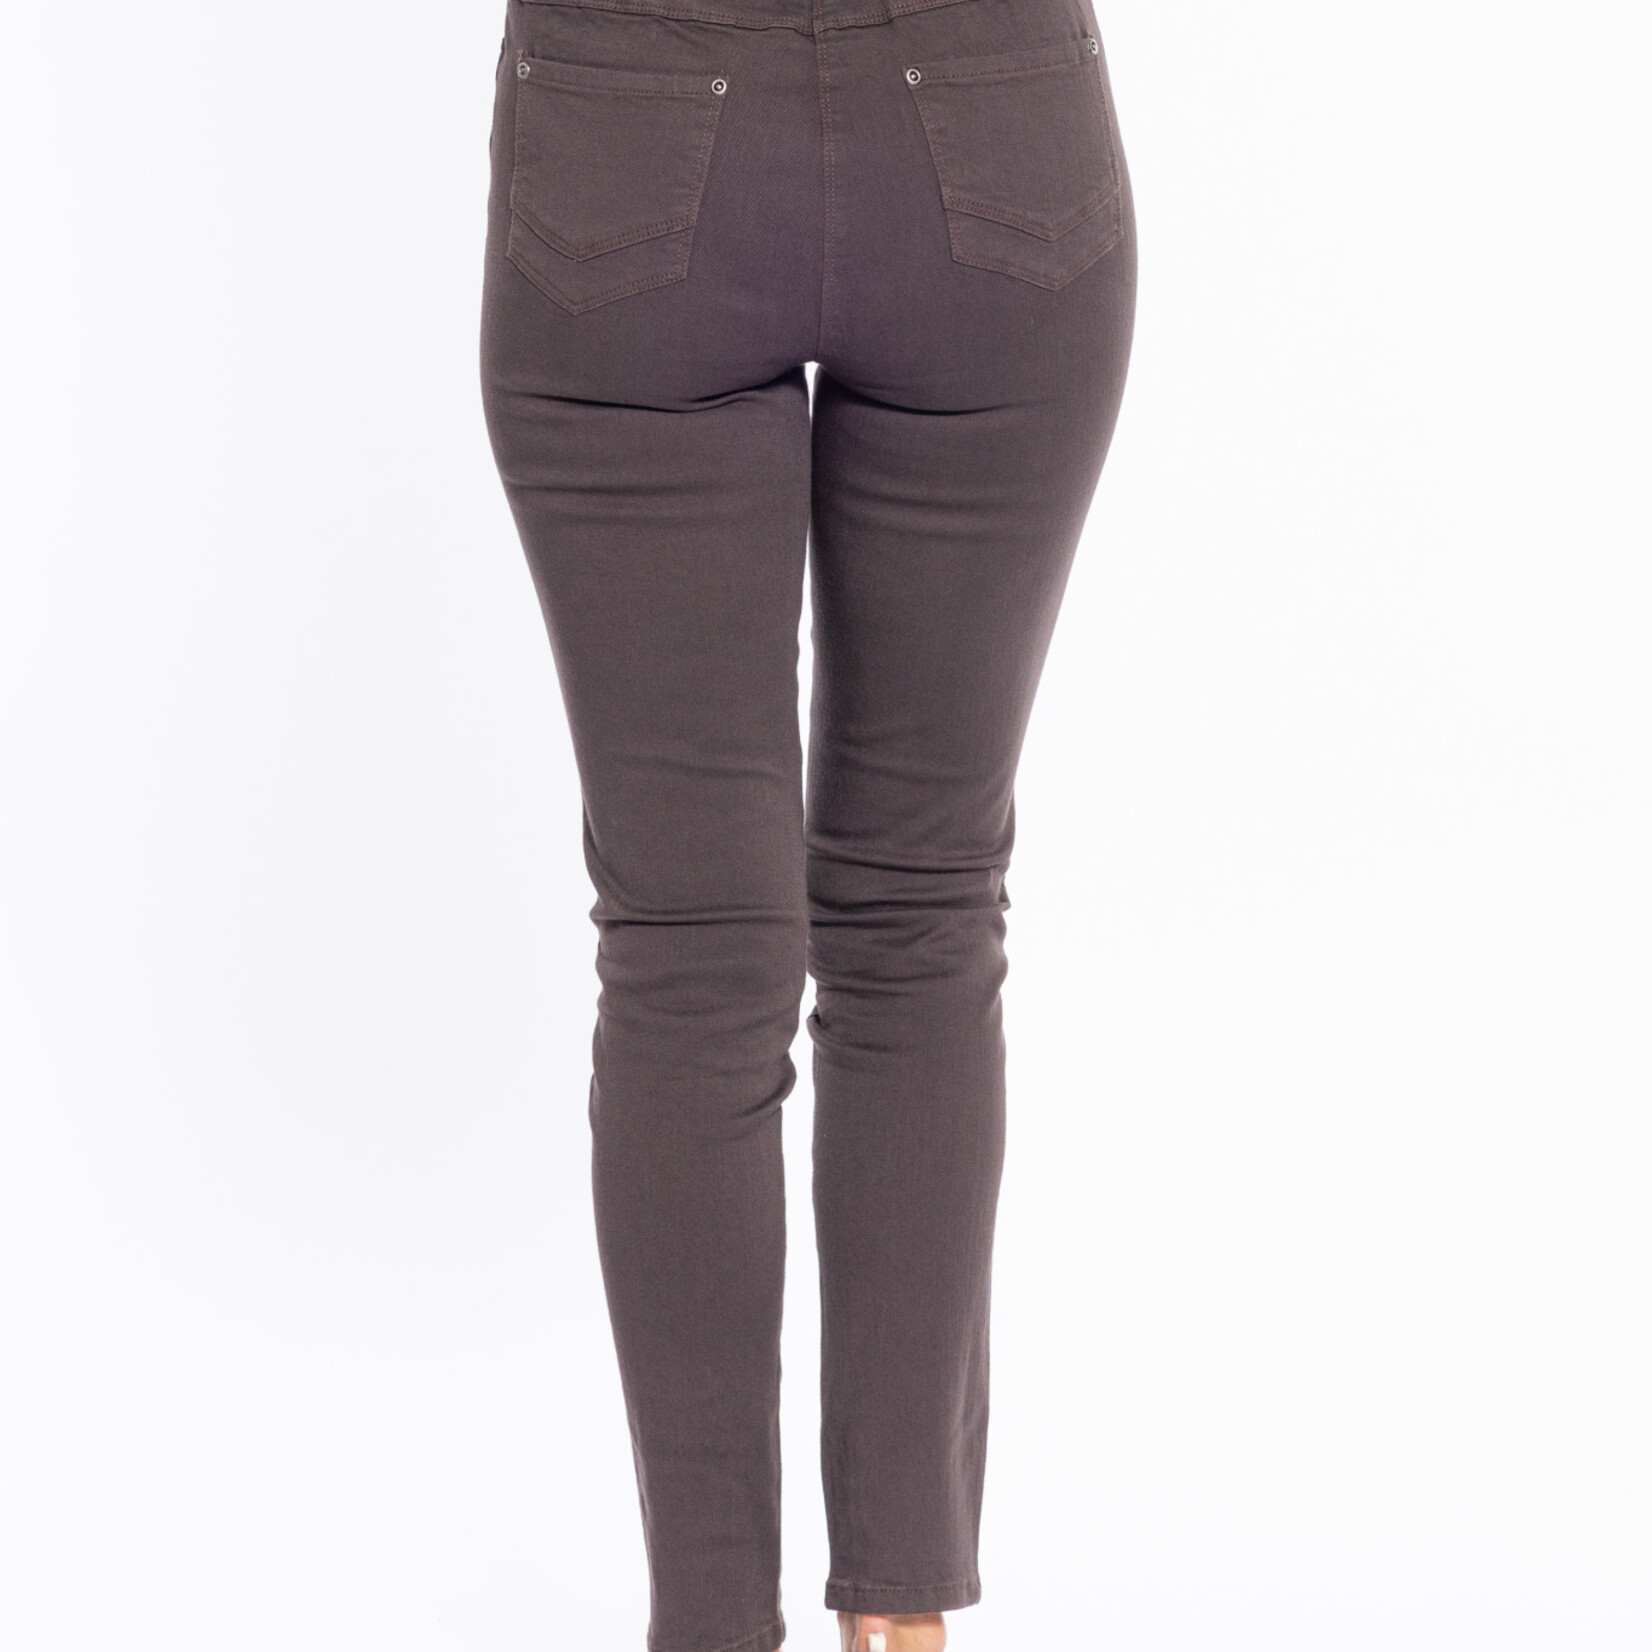 Chocolate Cotton Fitted Leg Jeggings - One Plus One Fashion